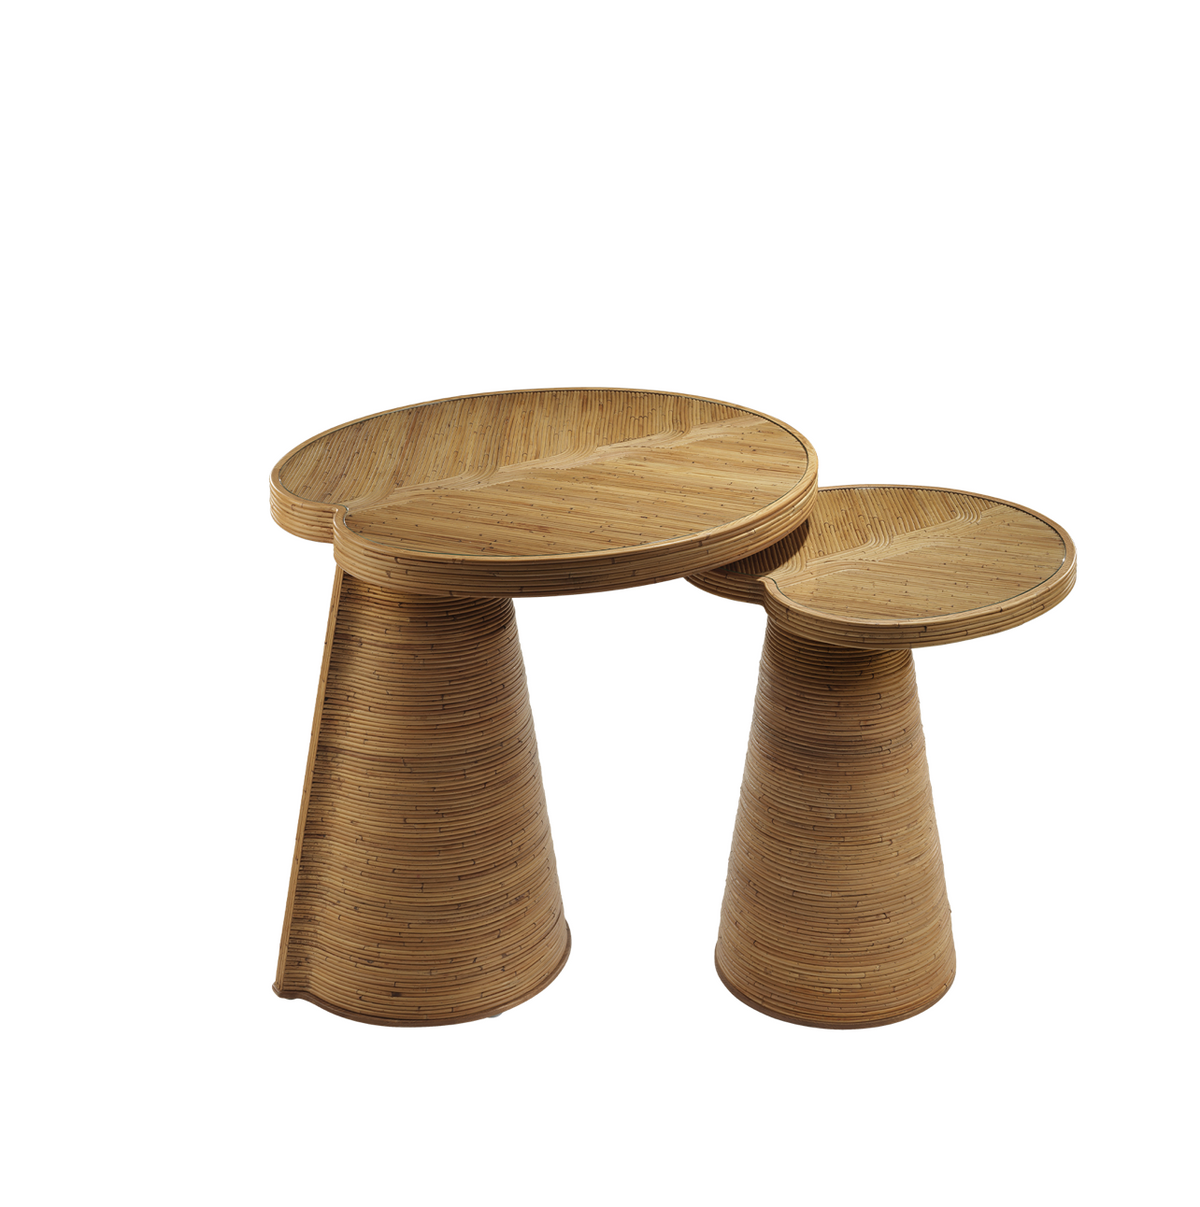 Malo nest tables